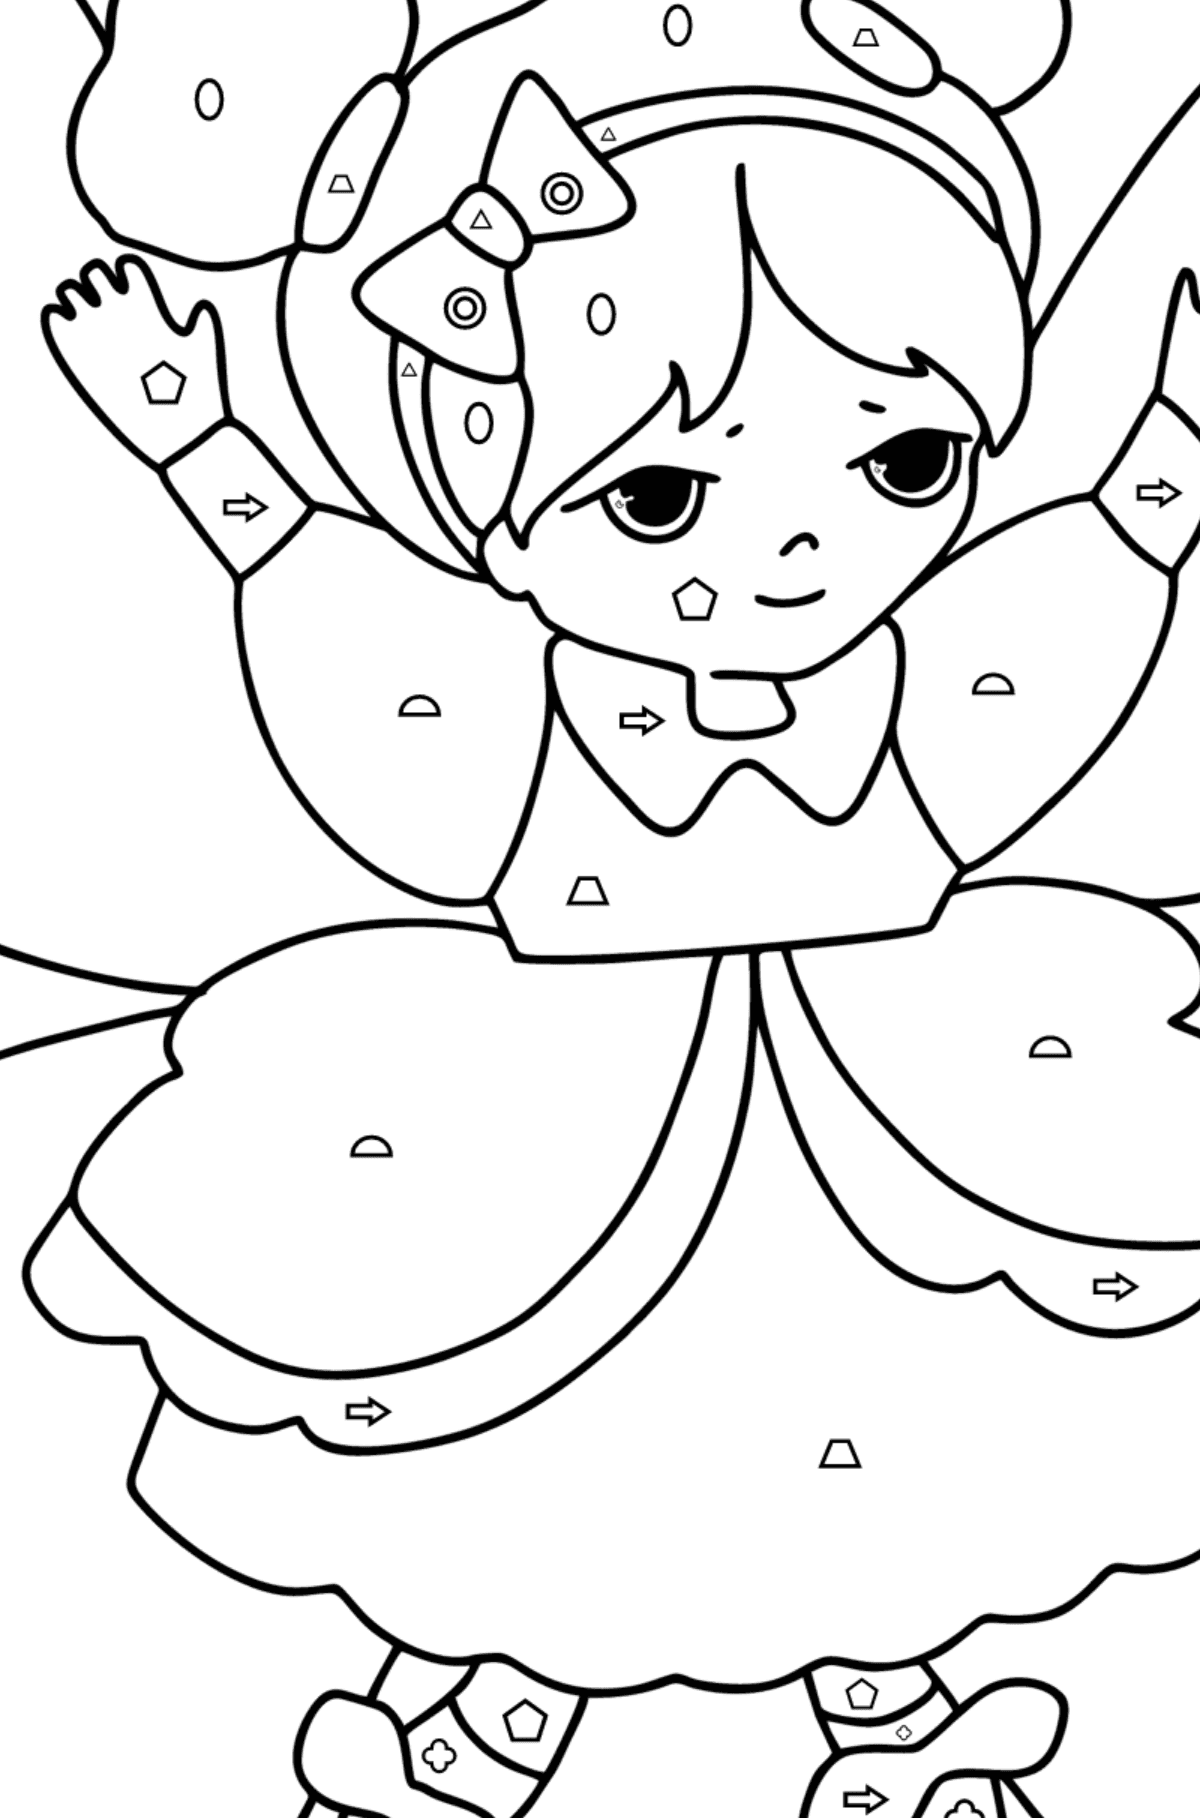 Flying Fairy coloring page - Coloring by Geometric Shapes for Kids